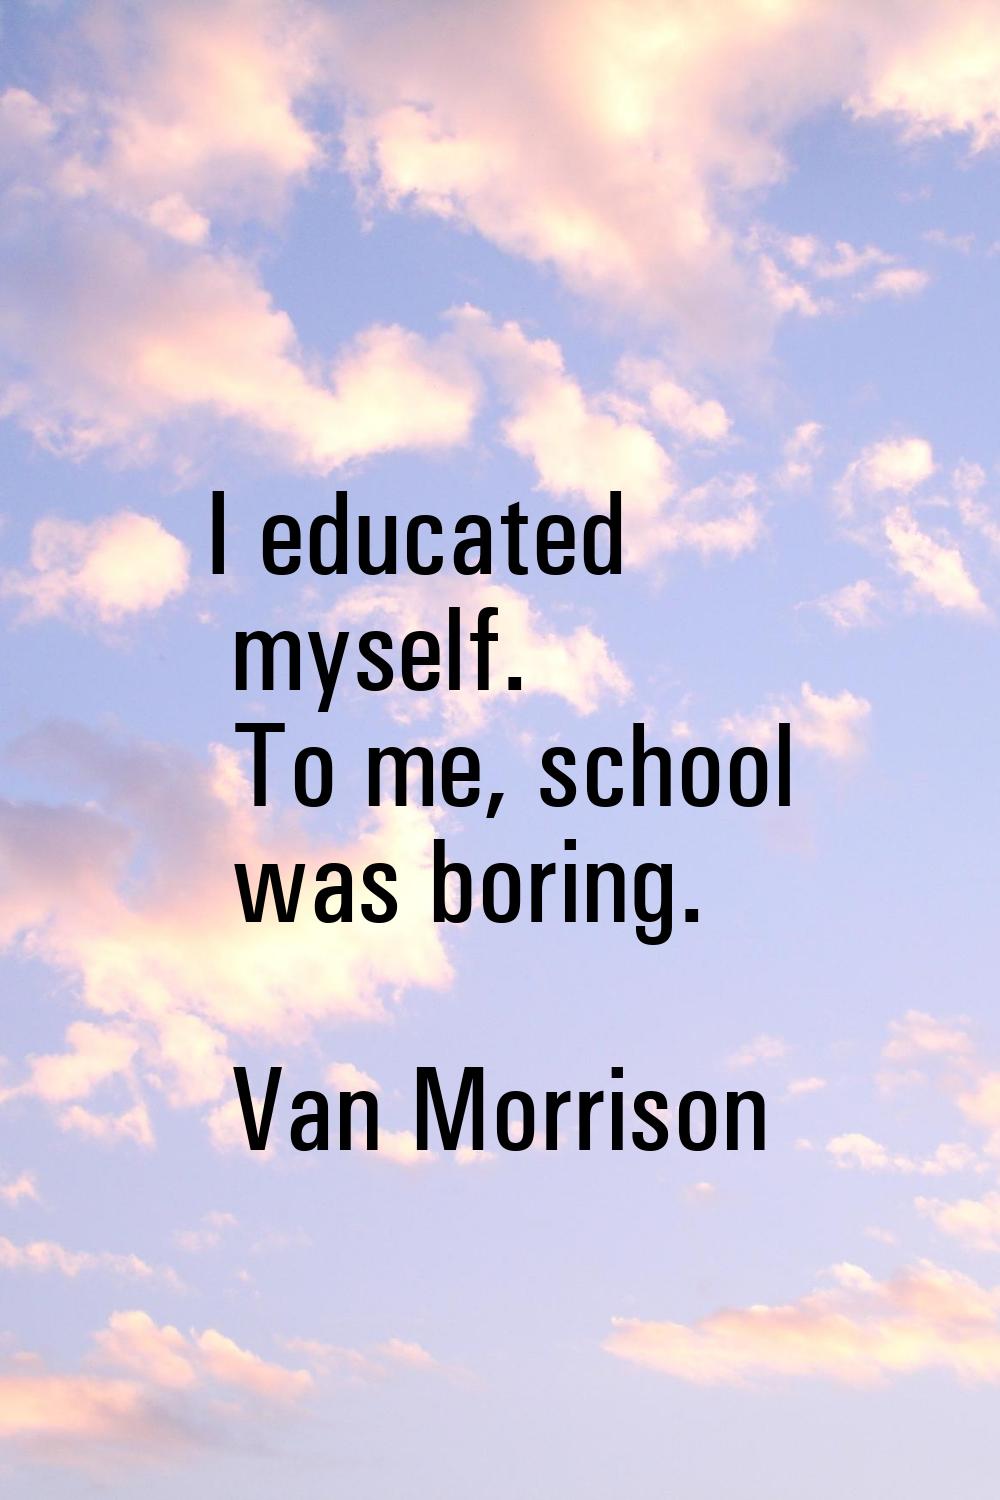 I educated myself. To me, school was boring.